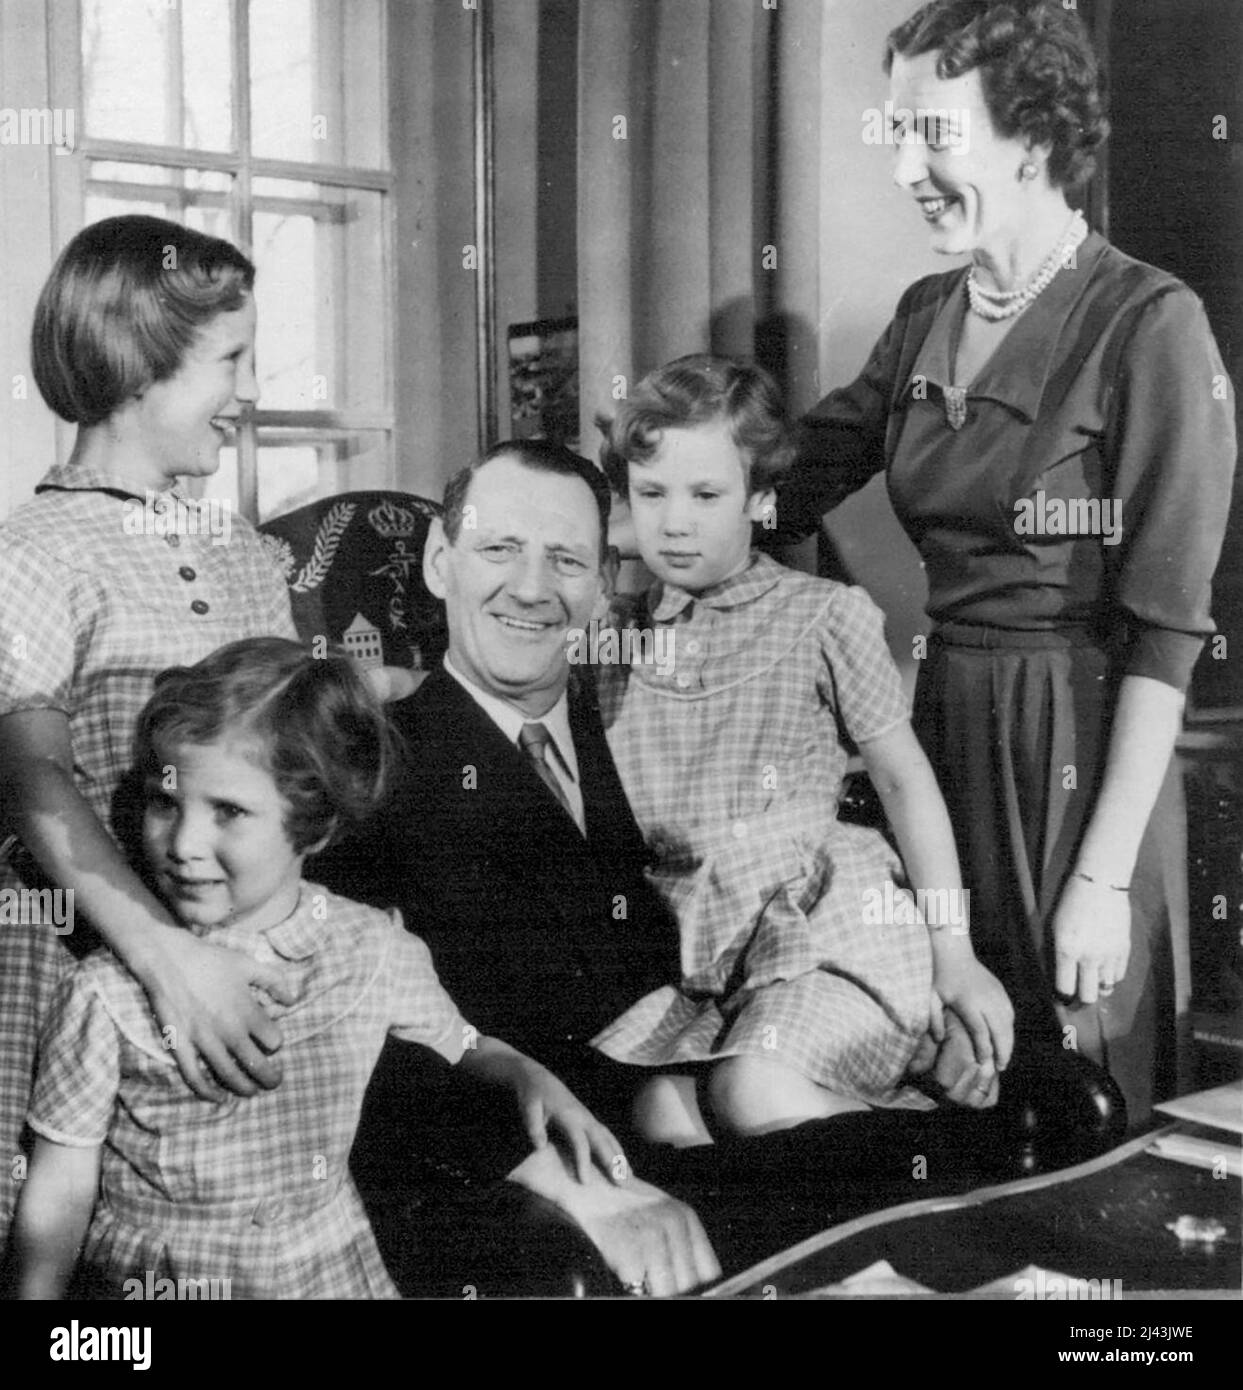 Denmark's Happy royal family - King and Queen for British. State Visit. A happy informal picture of king Frederick of Denmark, Queen Ingrid, and their three daughters Princesses Margrethe (born April 16th 1940), Benedikte, (April 29th. 1944) and Anna-Marie (August 30th. 1946). The king, the son of the late King Christian K, was born on March 11th. 1899. On May 24th.1935 he married Princess Ingrid of Sweden, born on March 28th. 1910, the daughter of King Gustaf VI Adolf of Sweden. The king and queen are coming to Britain for a state on May 8th. - five days after the opening of he fevstival of Stock Photo